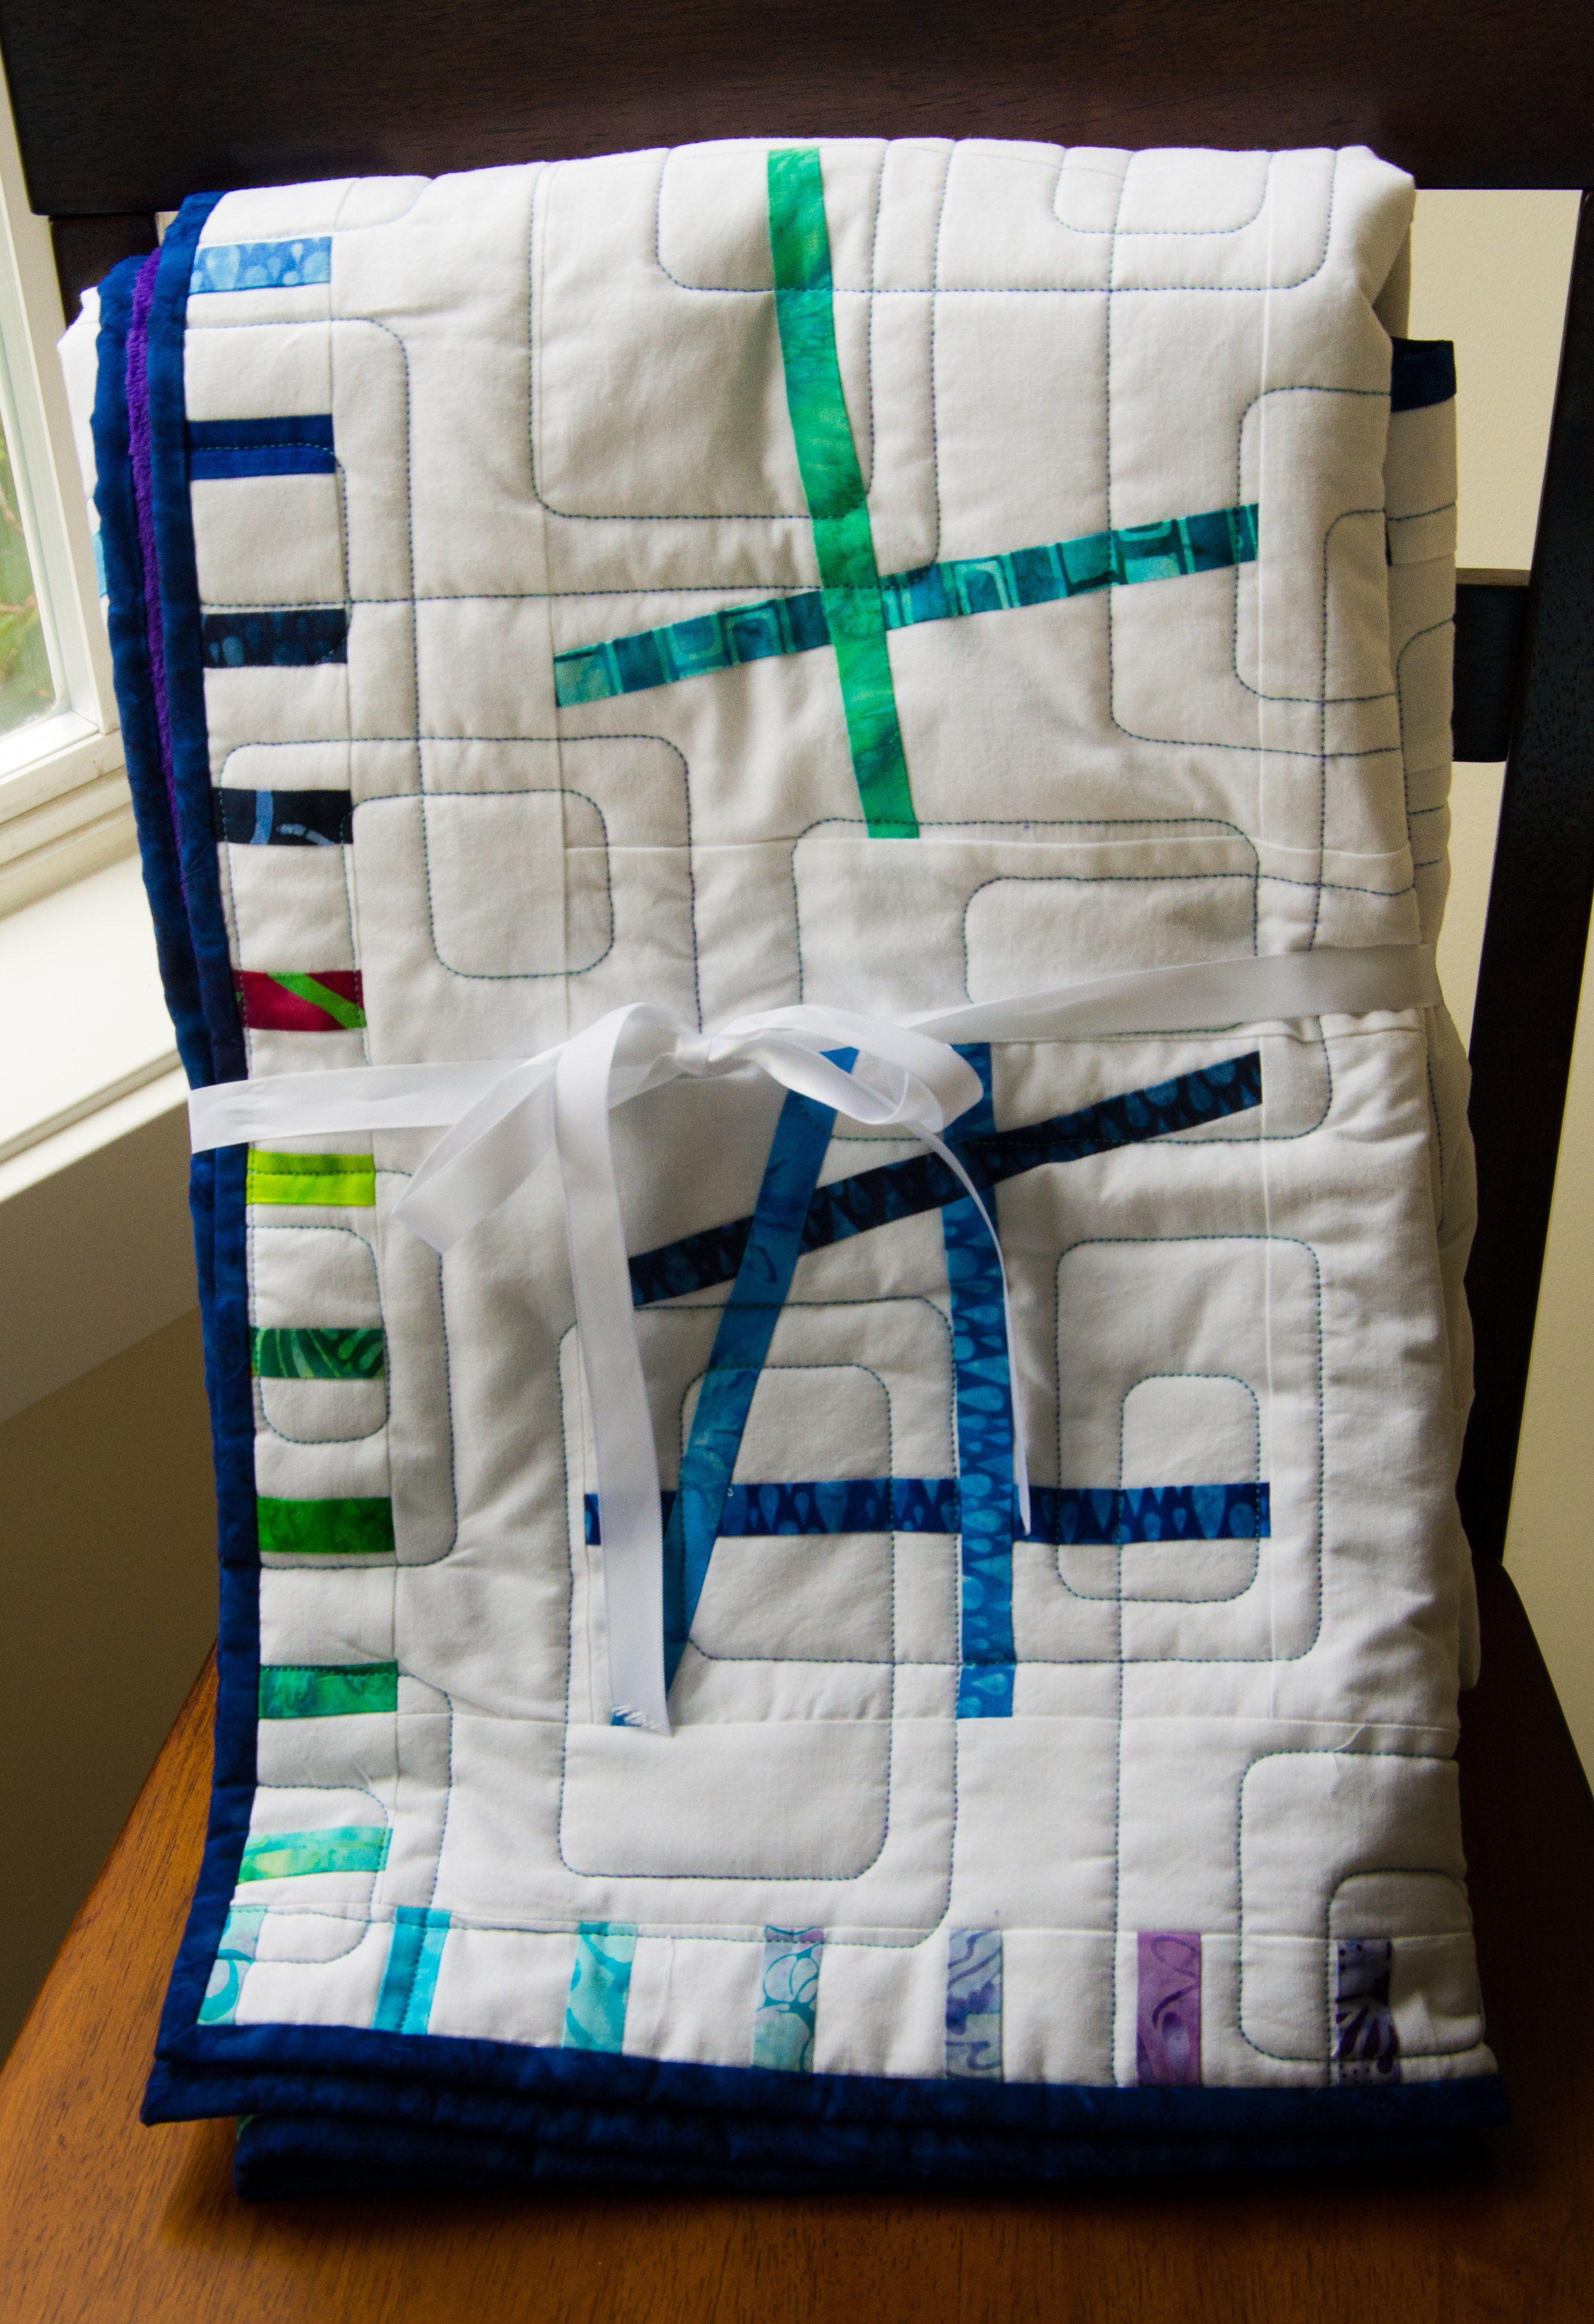 longarm quilting - Quiltingboard Forums